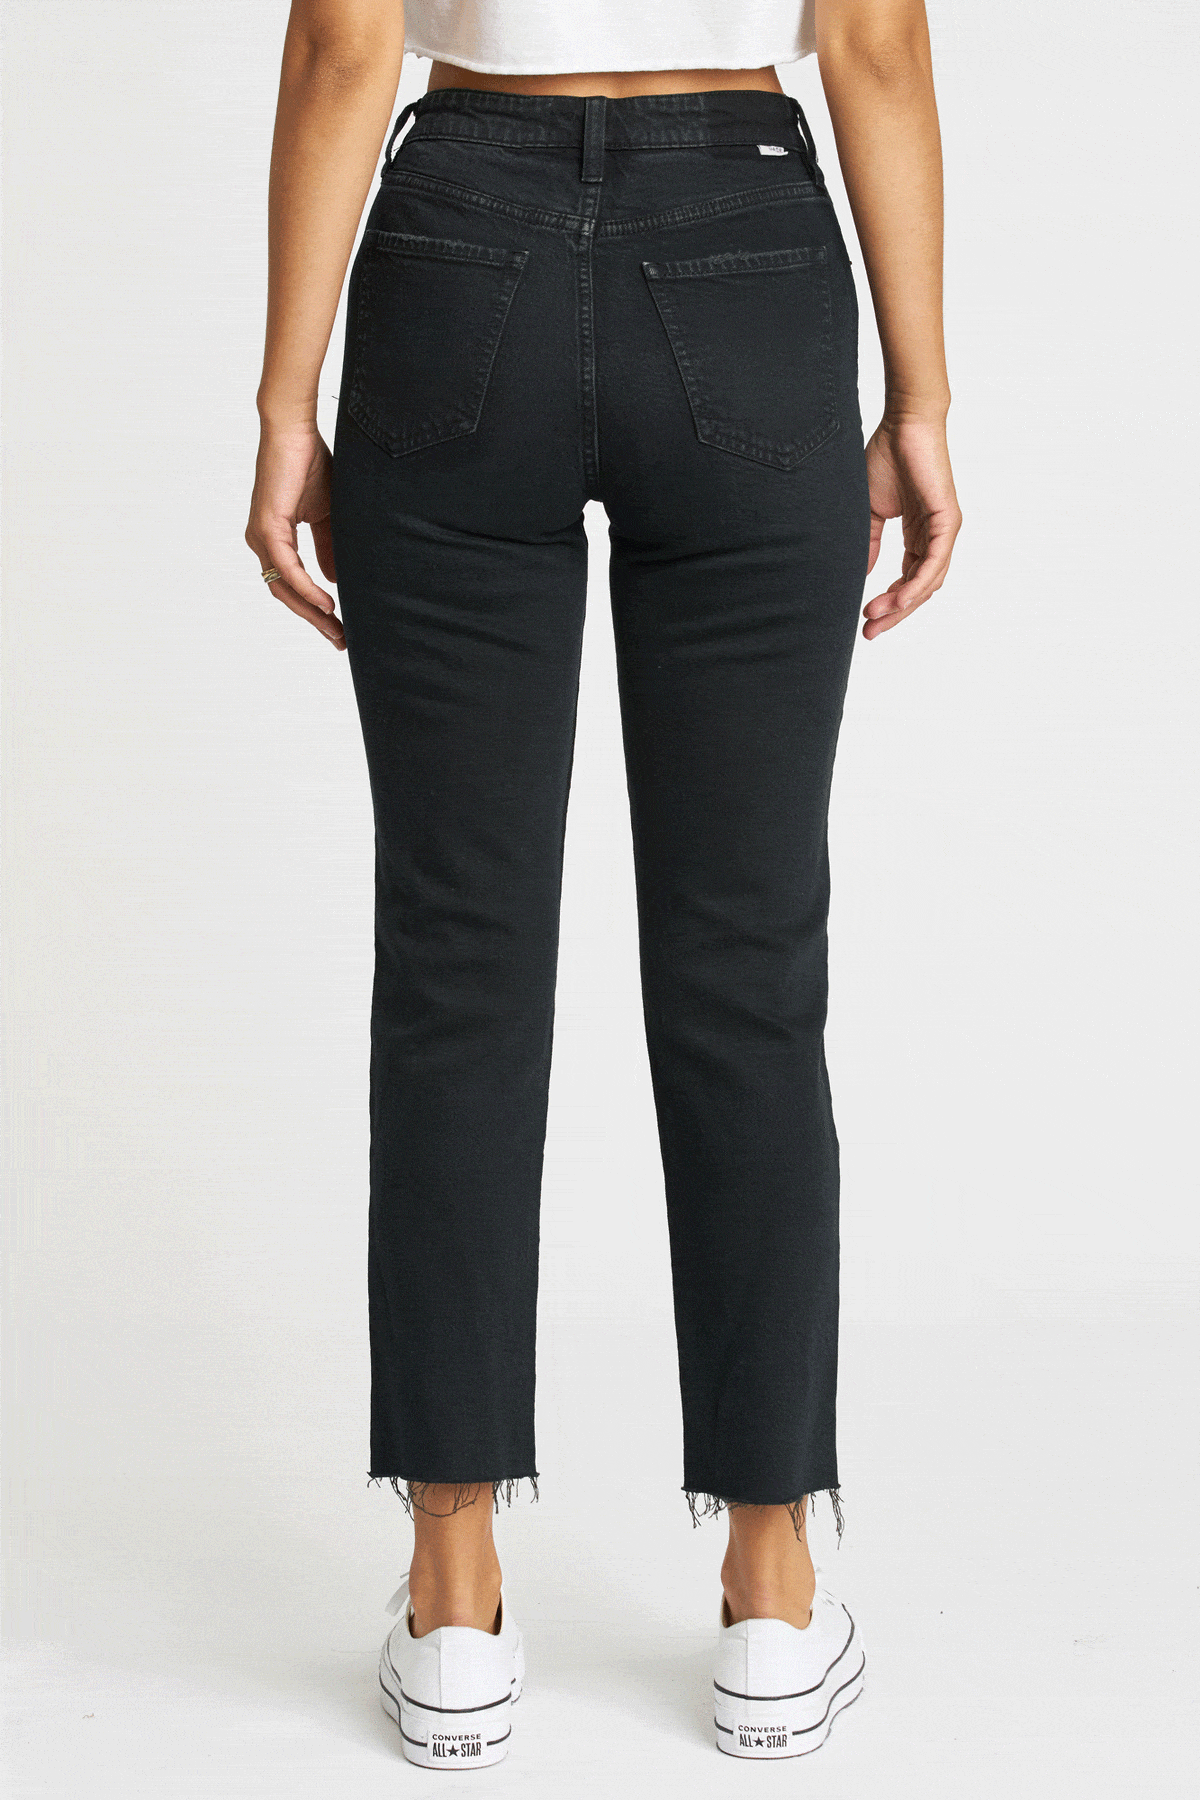 DAZE Denim Daily Driver High Rise Skinny Straight in Inked - Pants - Blooming Daily